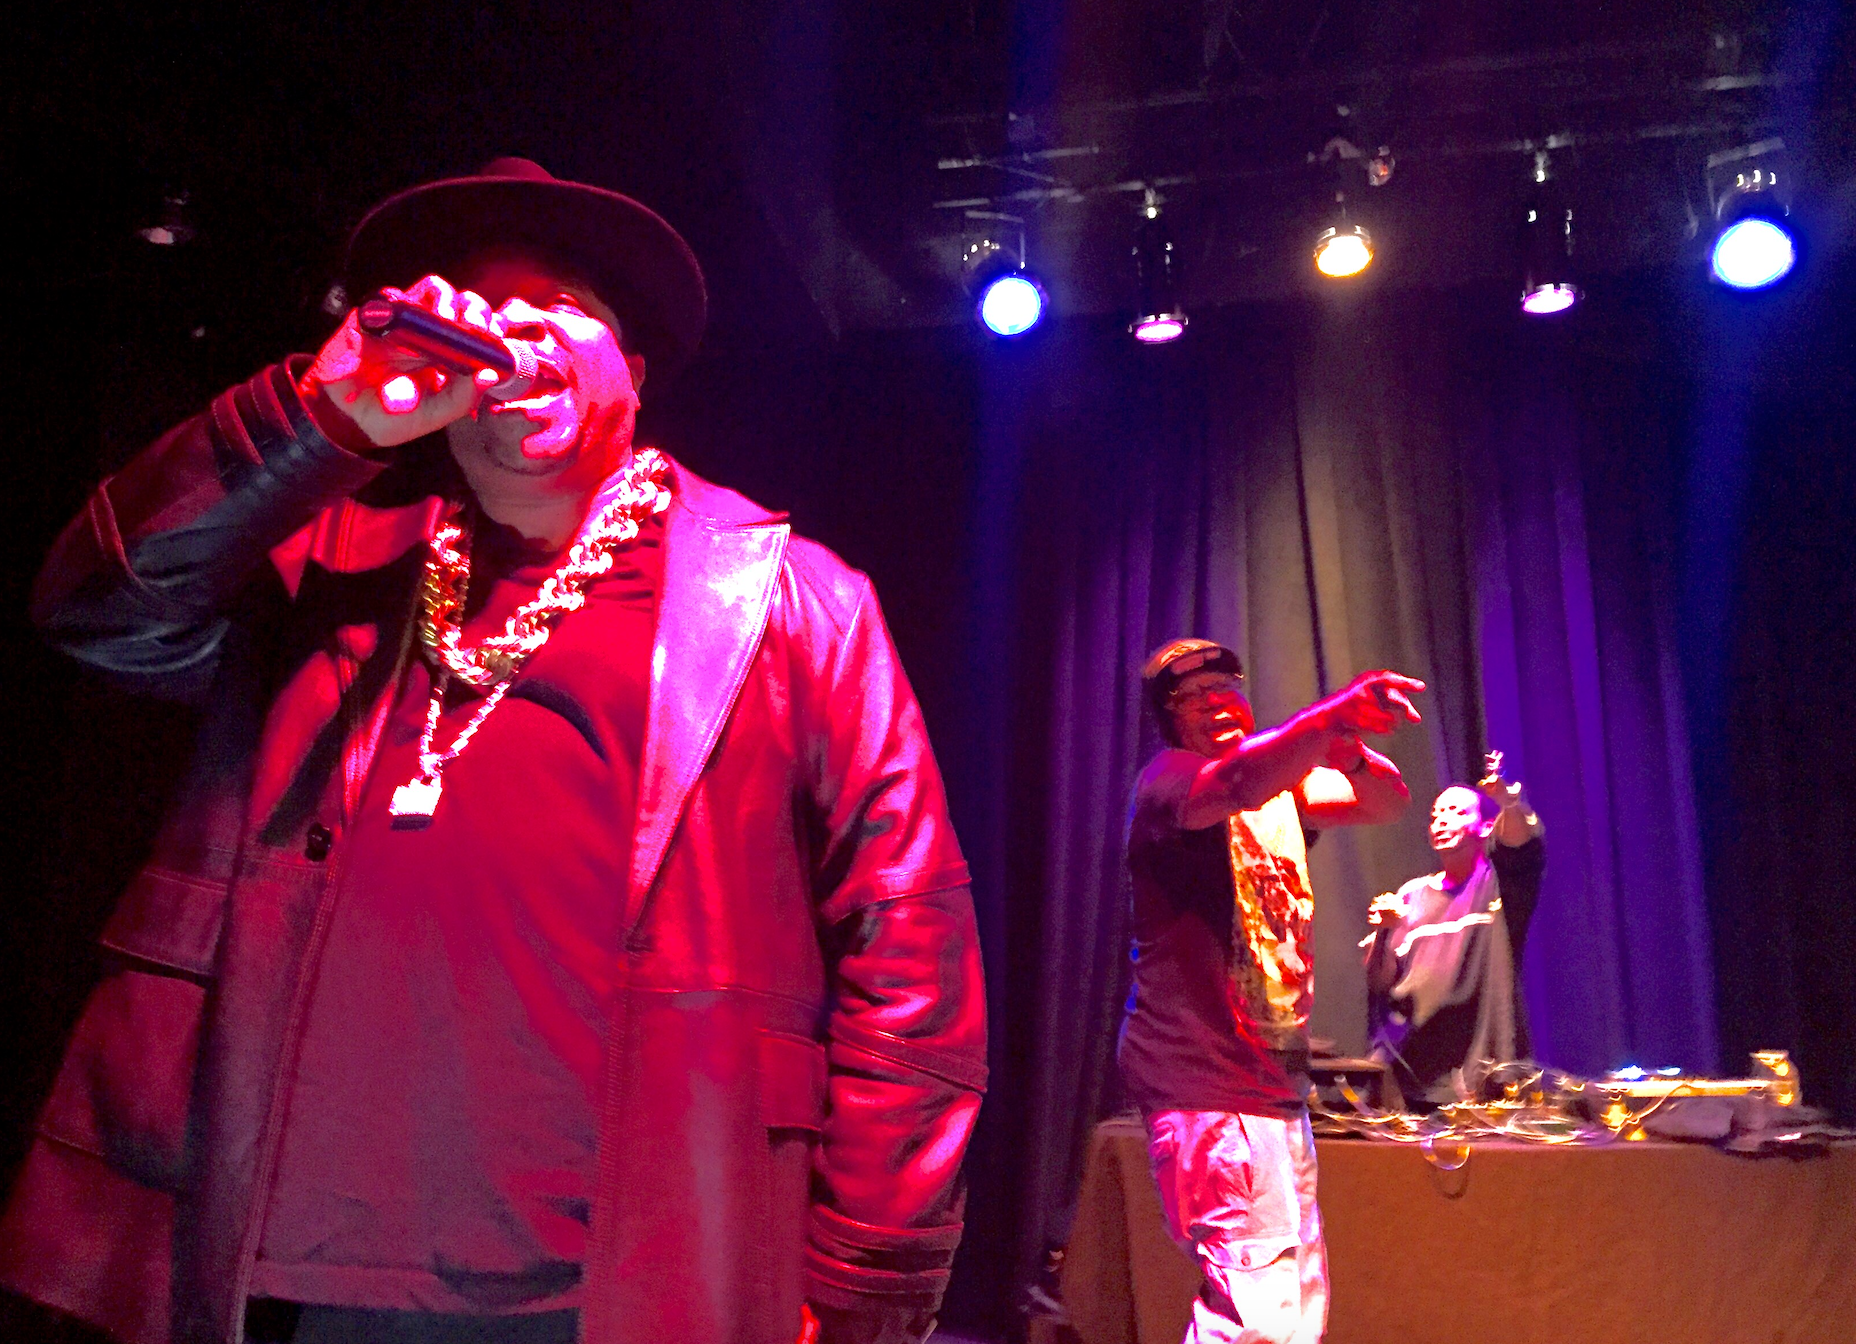 Sir Mix A Lot at the Ritz in DTSJ